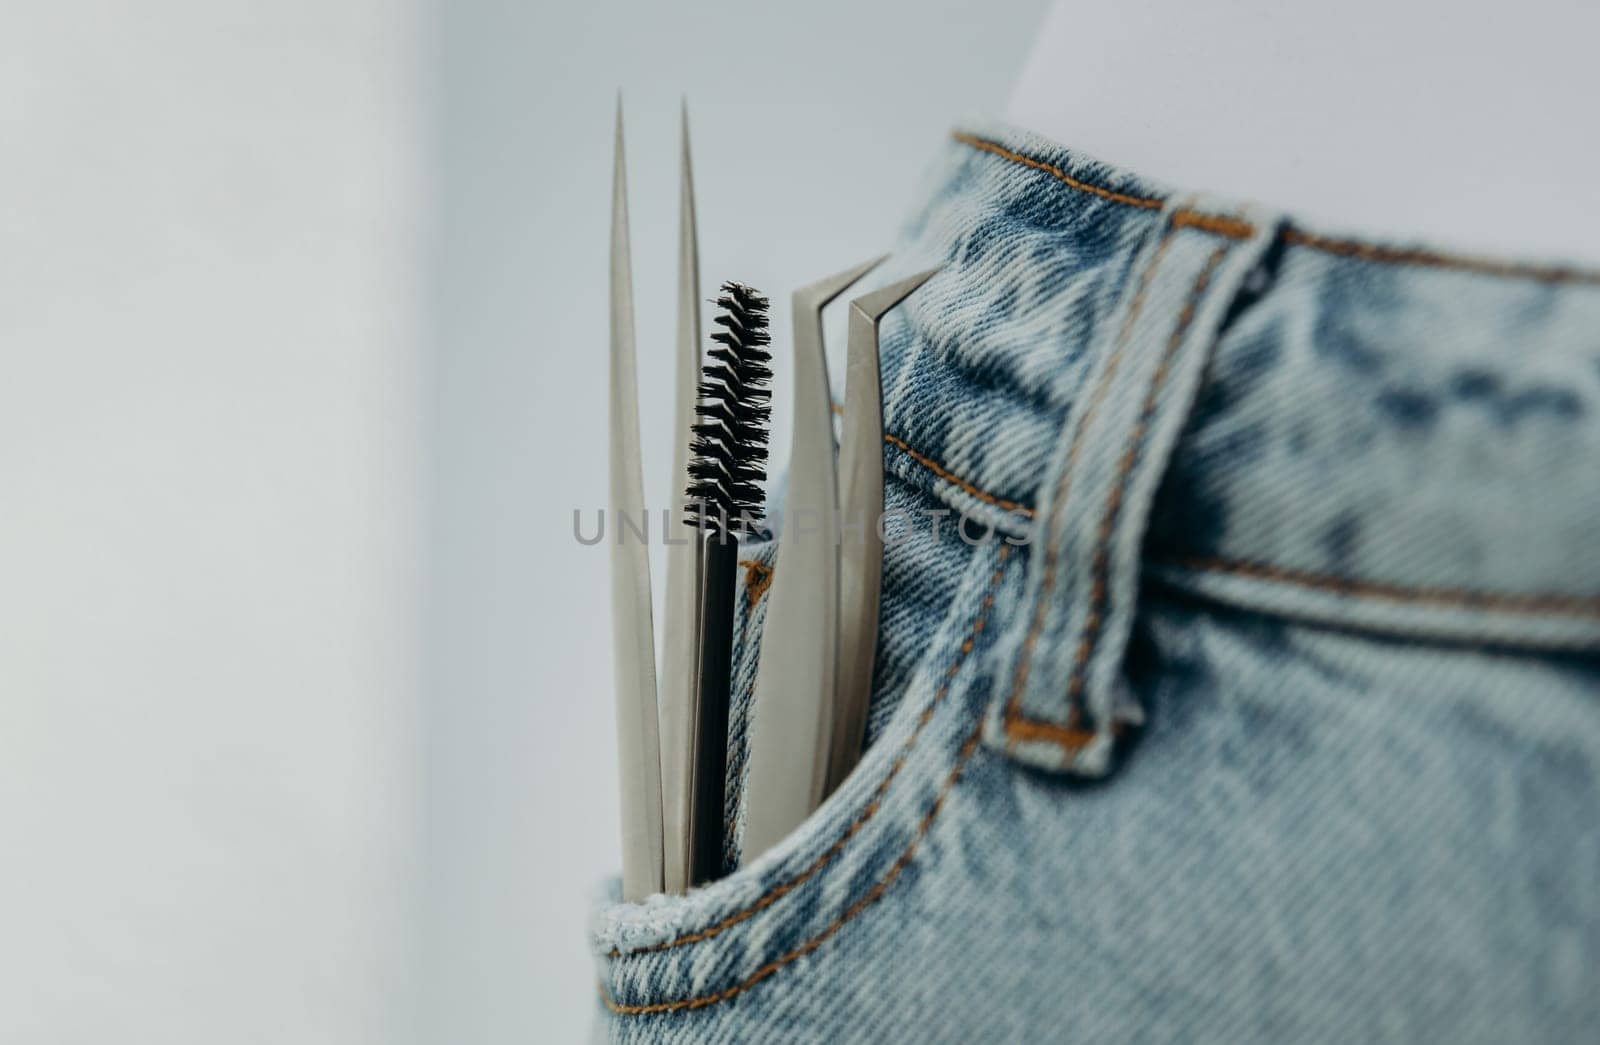 Two tweezers and a brush for eyelash extensions in a jeans pocket. by Nataliya